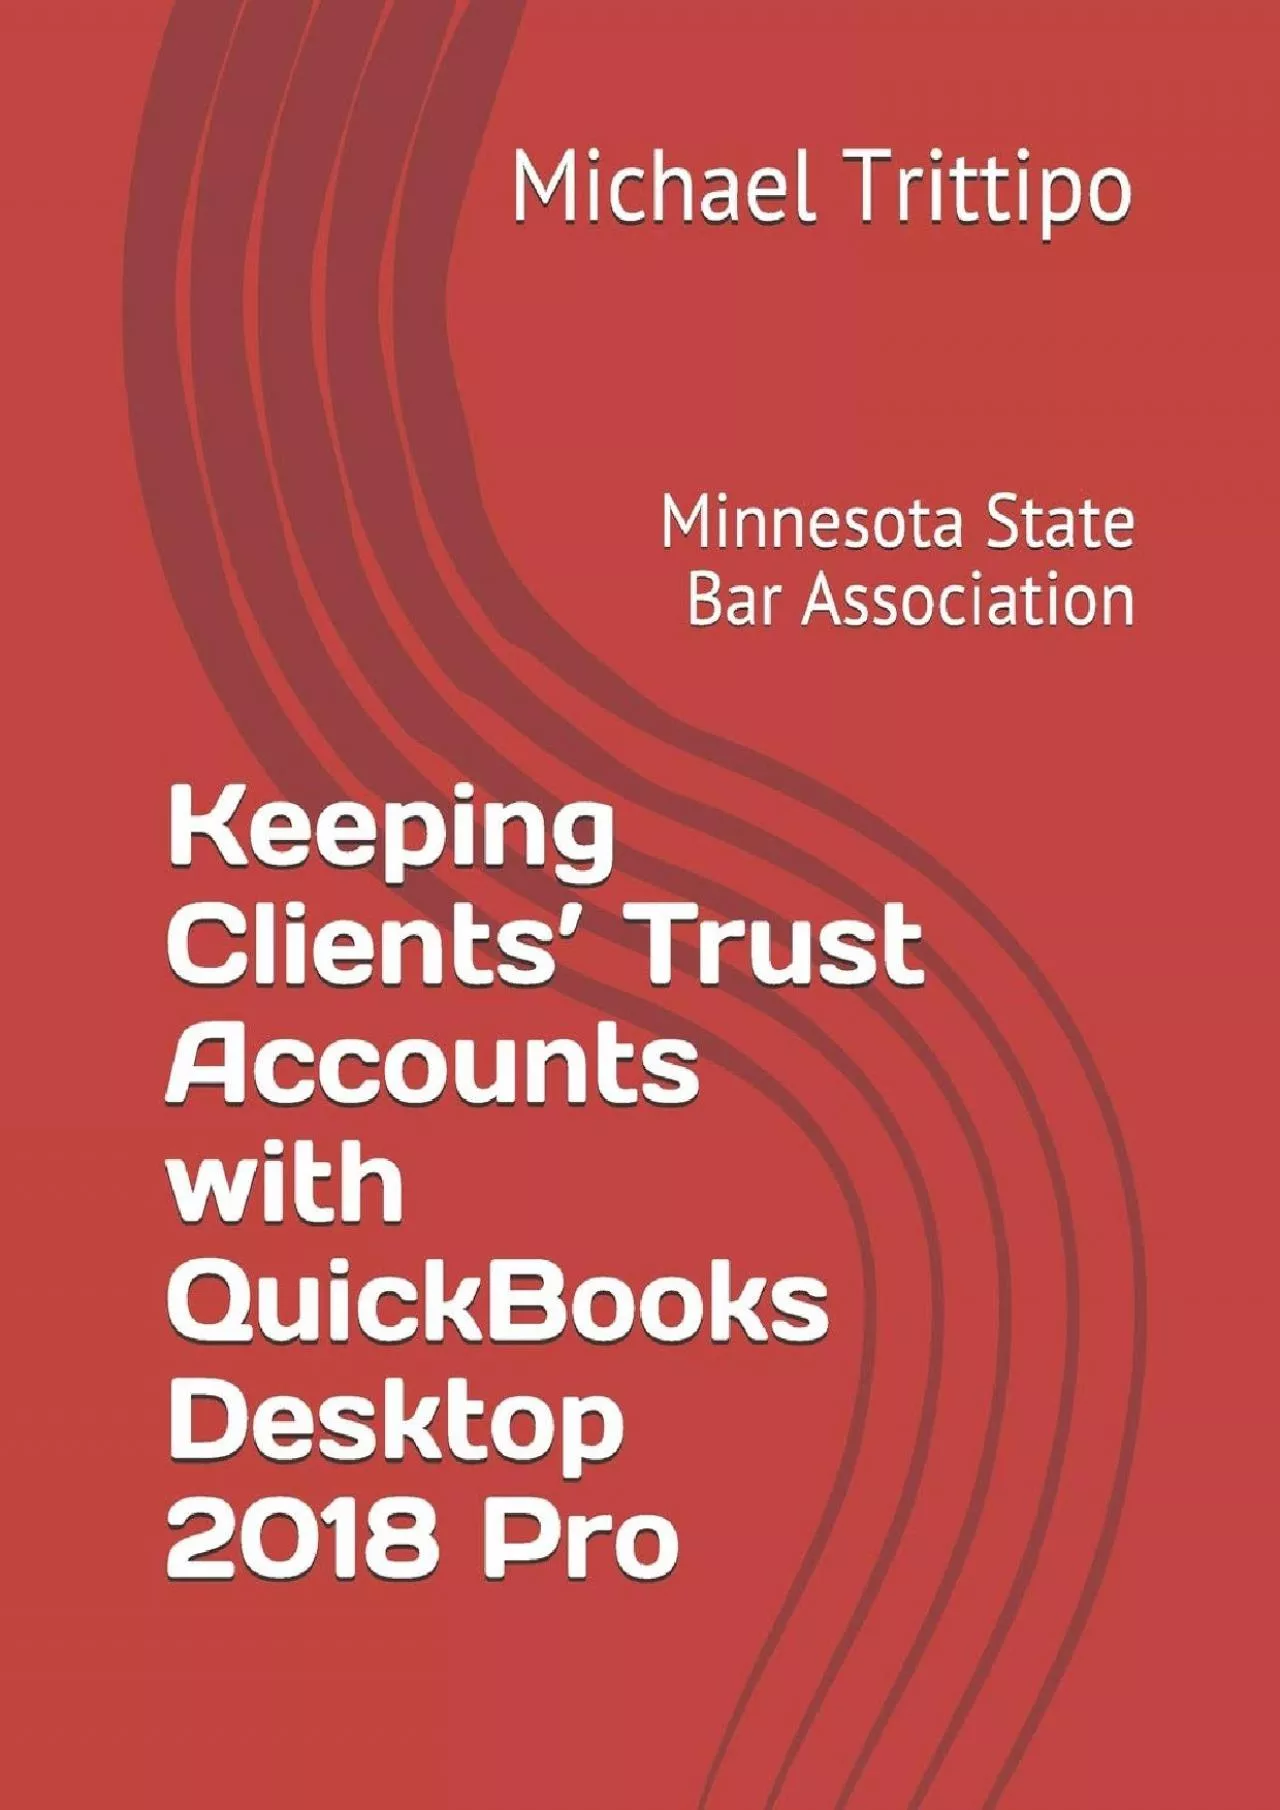 (DOWNLOAD)-Keeping Clients’ Trust Accounts with QuickBooks Desktop 2018 Pro (MSBA IOLTA